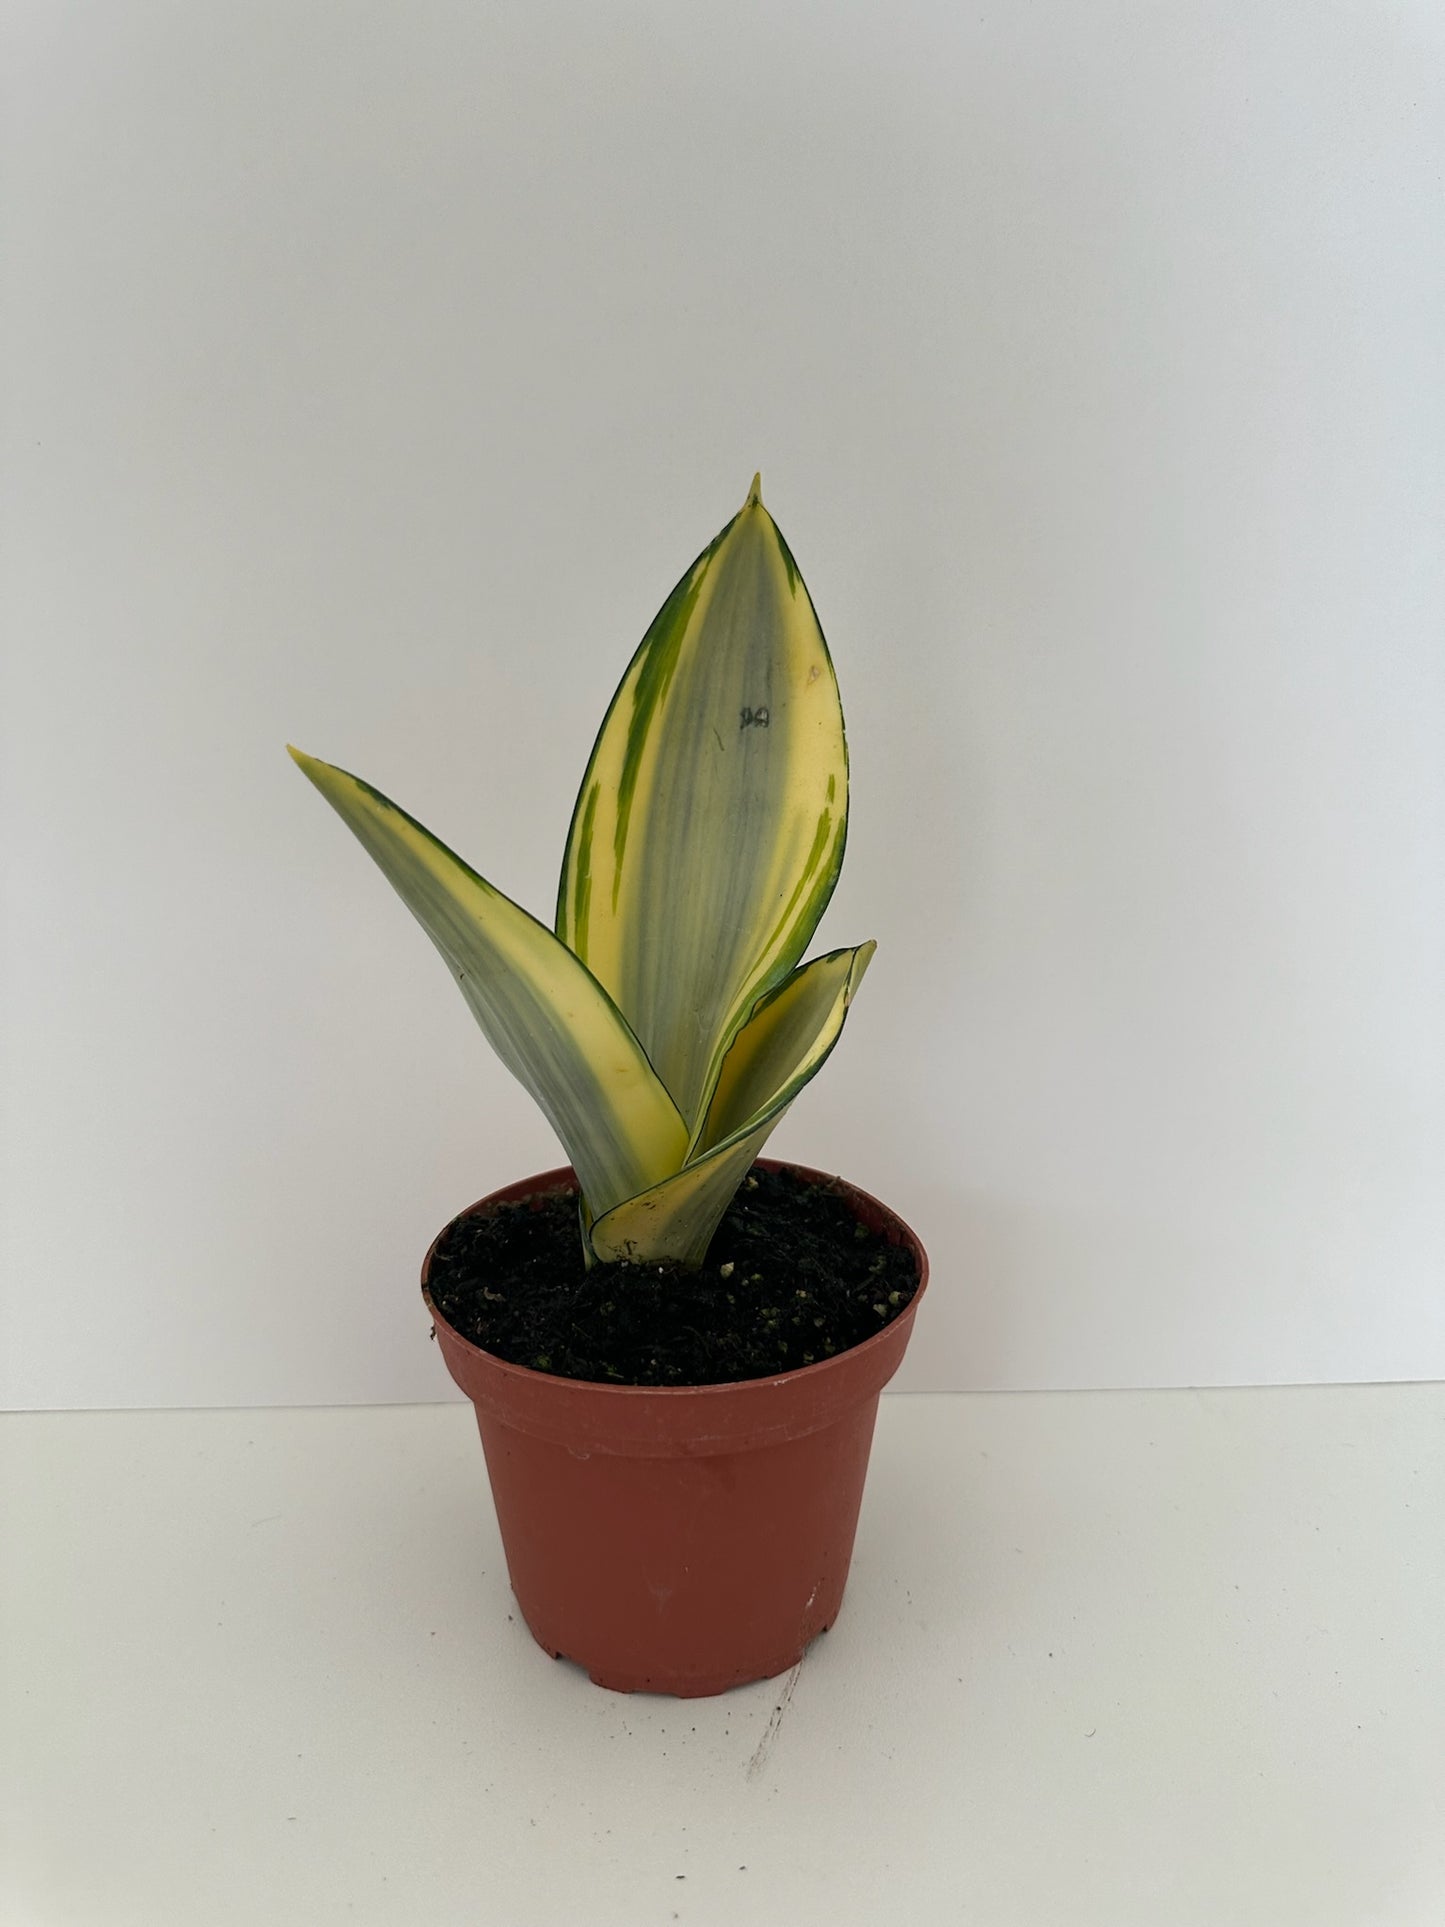 Sansevieria Trifasciata 'Gold Ghost' Snake Plant- Low Maintenance, Low Light & Vibrant Colored Leaves- Tropical Houseplant (4" or 6" Nursery Pot)